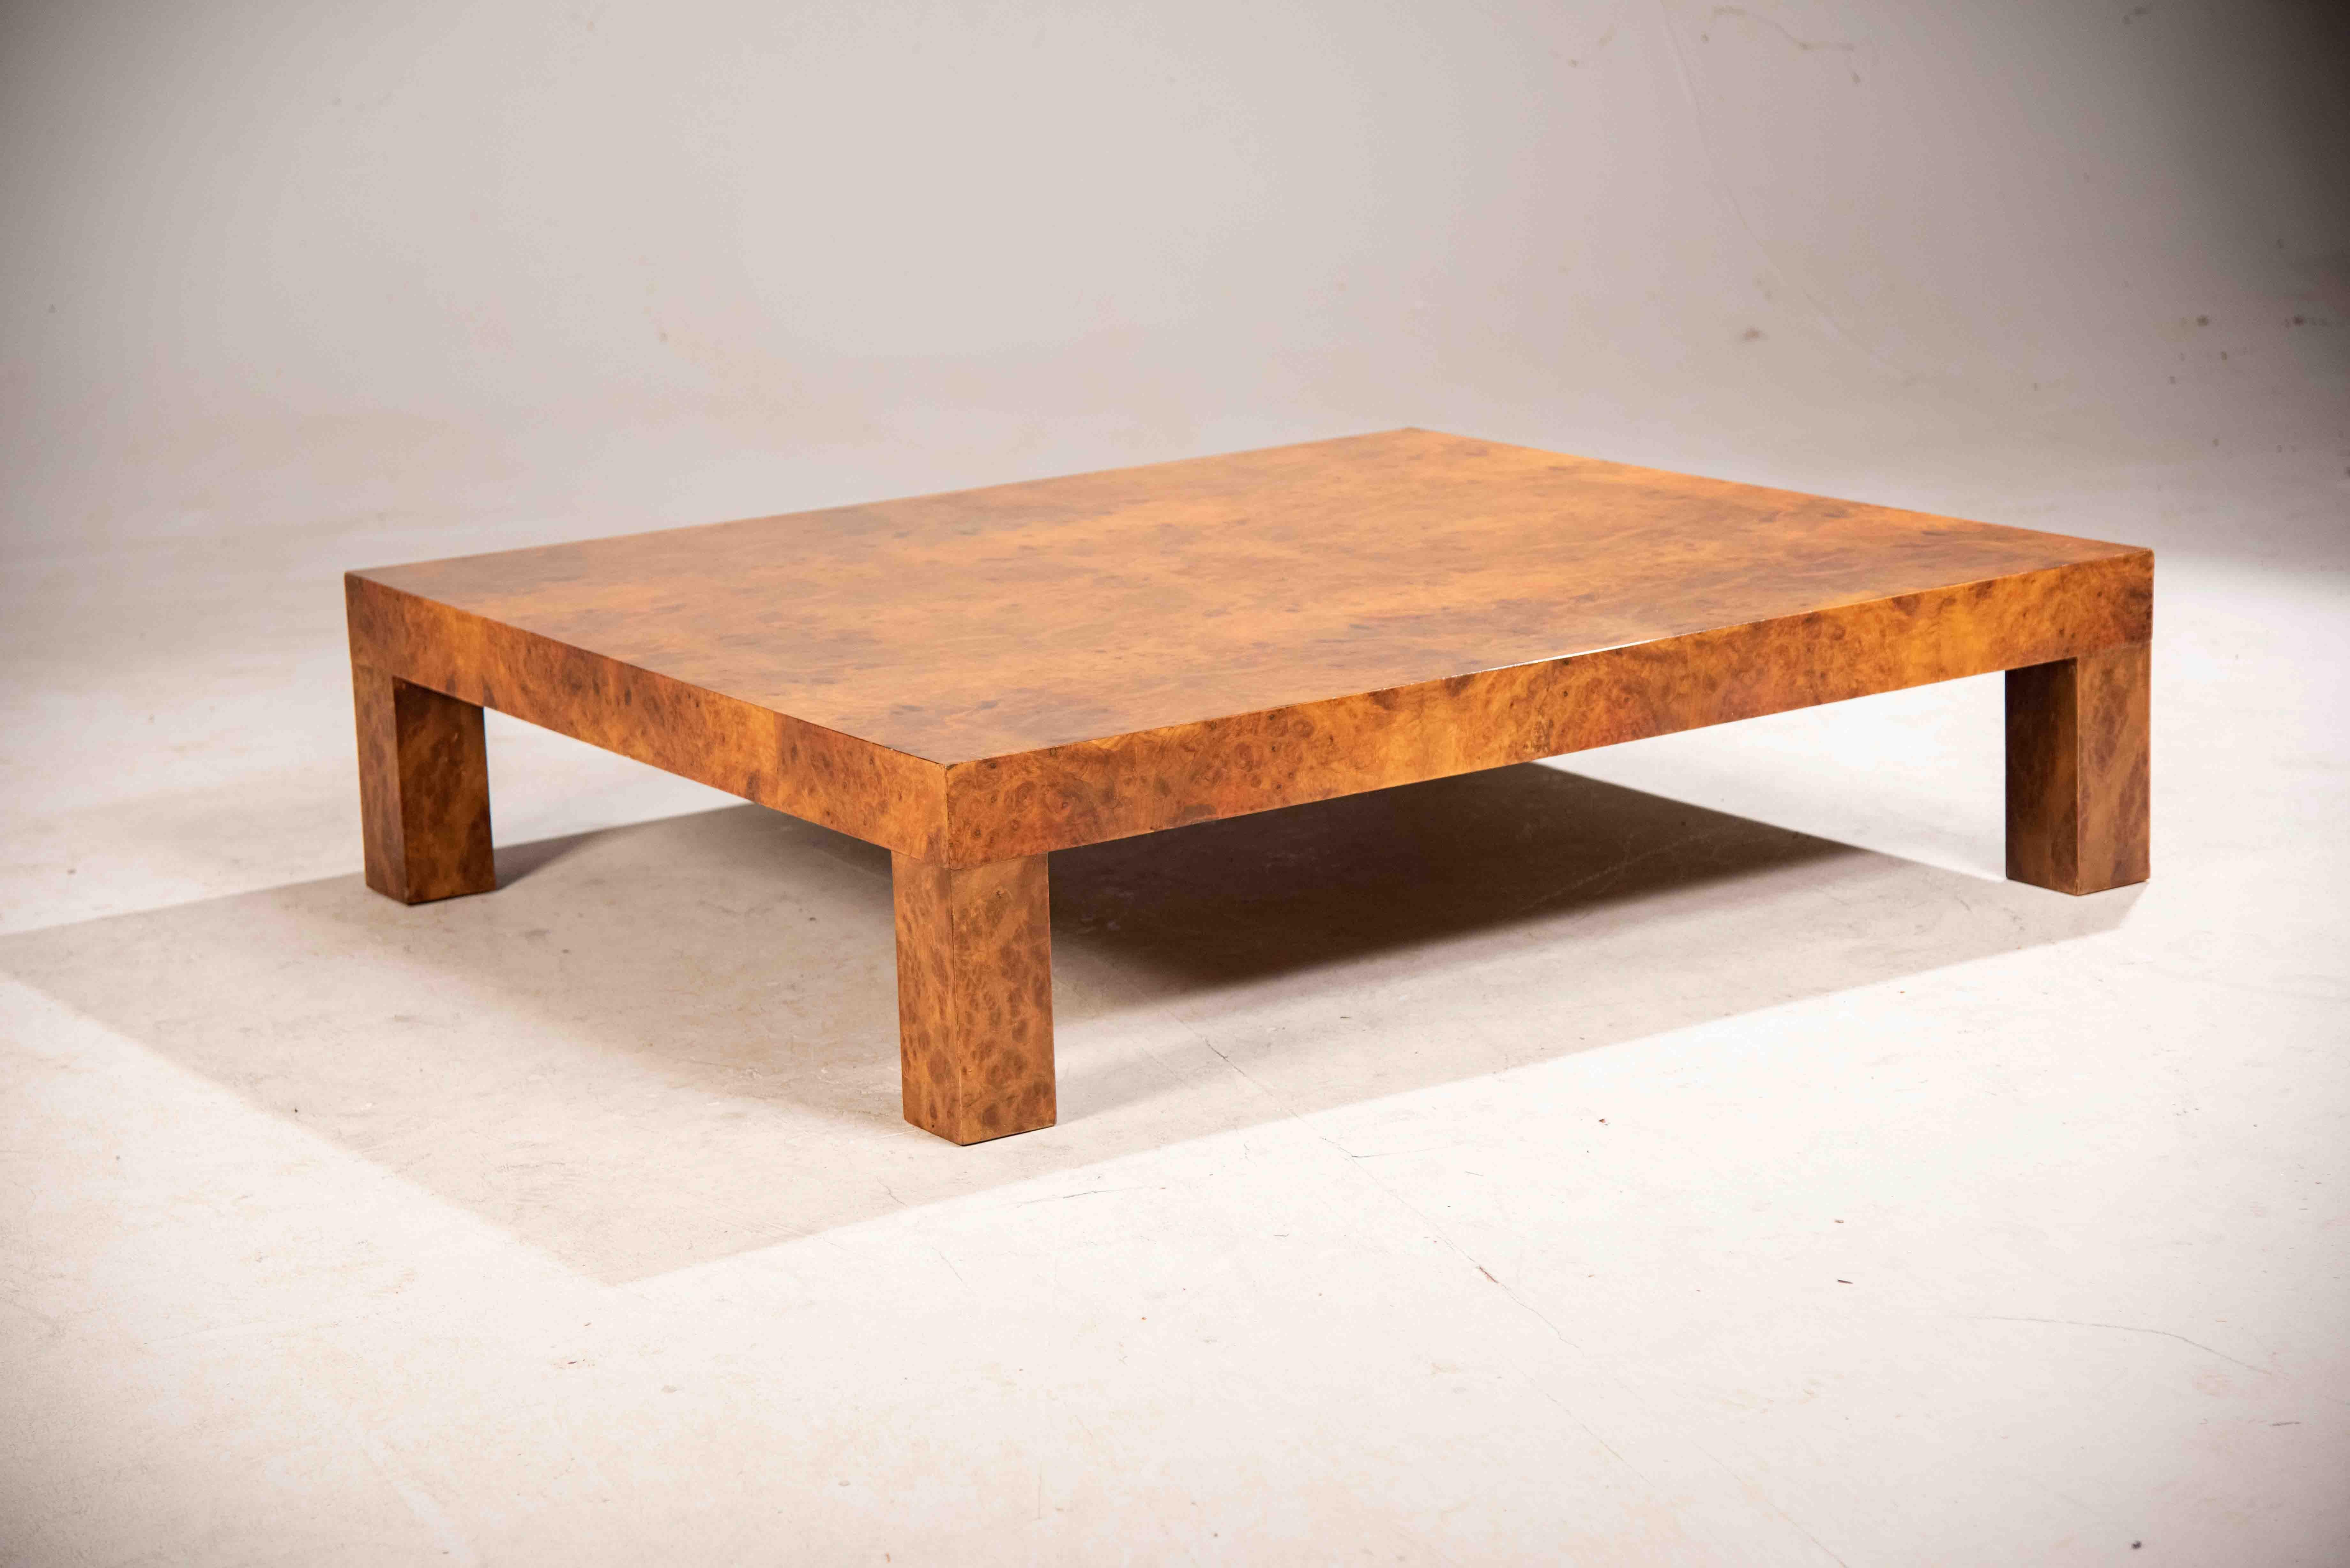 1970s Elm burl squared coffee table, Italy. The coffee table with square legs is made of elm burl and has been conservatively restored. Its condition is therefore excellent. 
Price: Euro 4,000 . 
Measurements: w150 x d130 cm , h 37